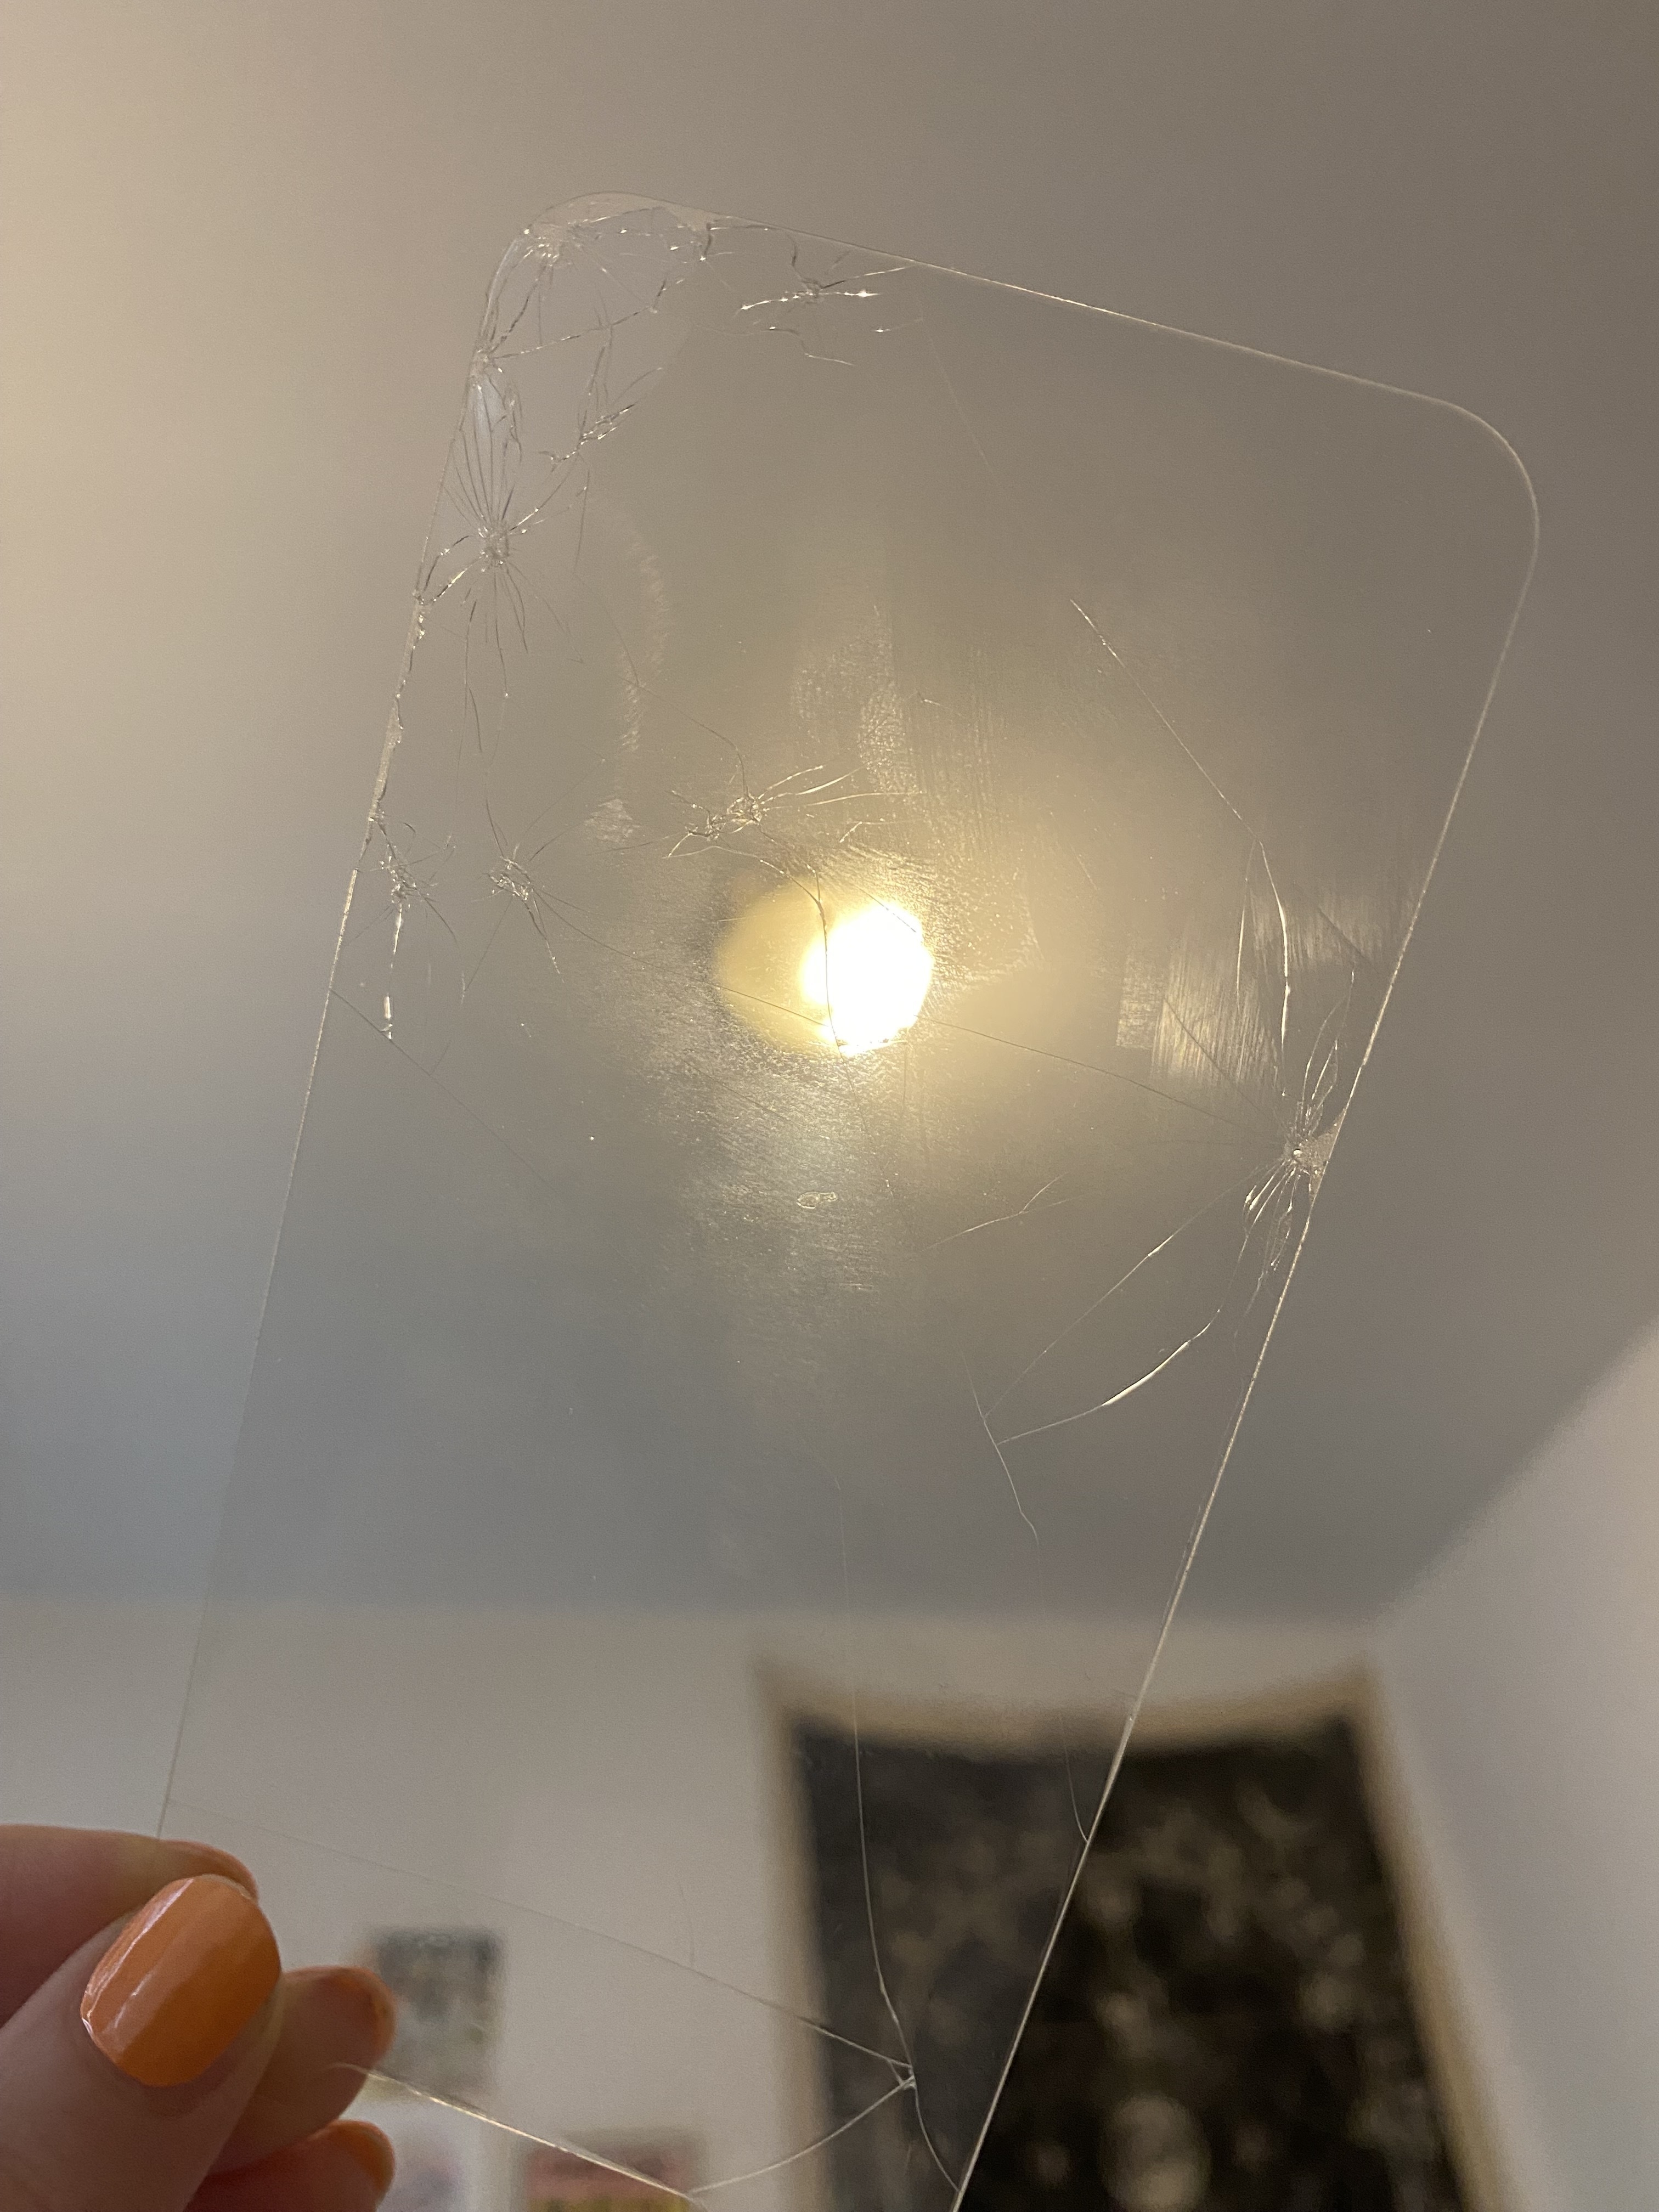 cracked glass phone screen protector